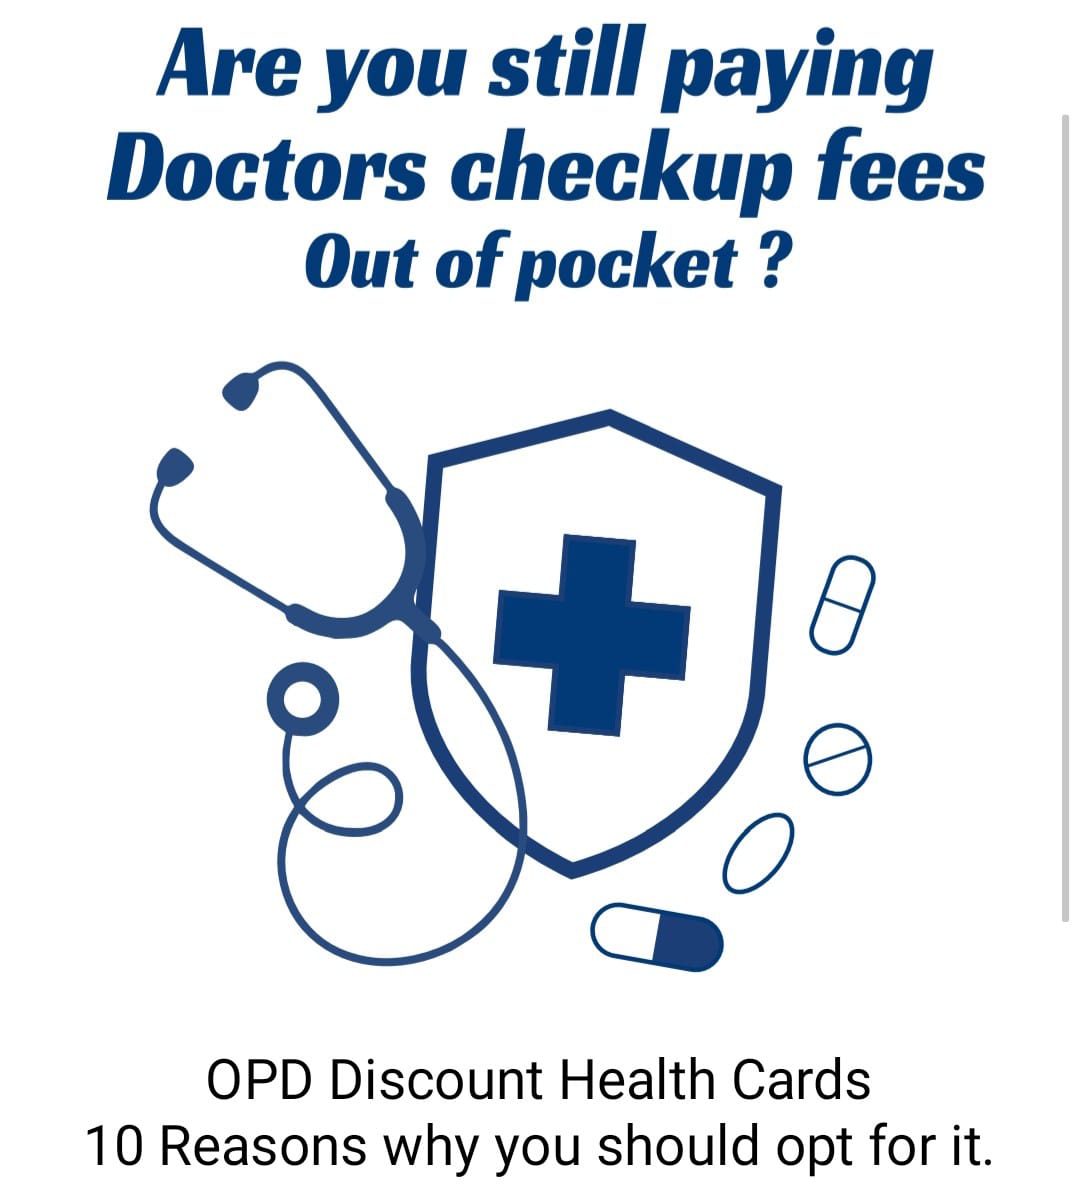 OPD Discount Health Cards: 10 Convincing Reasons